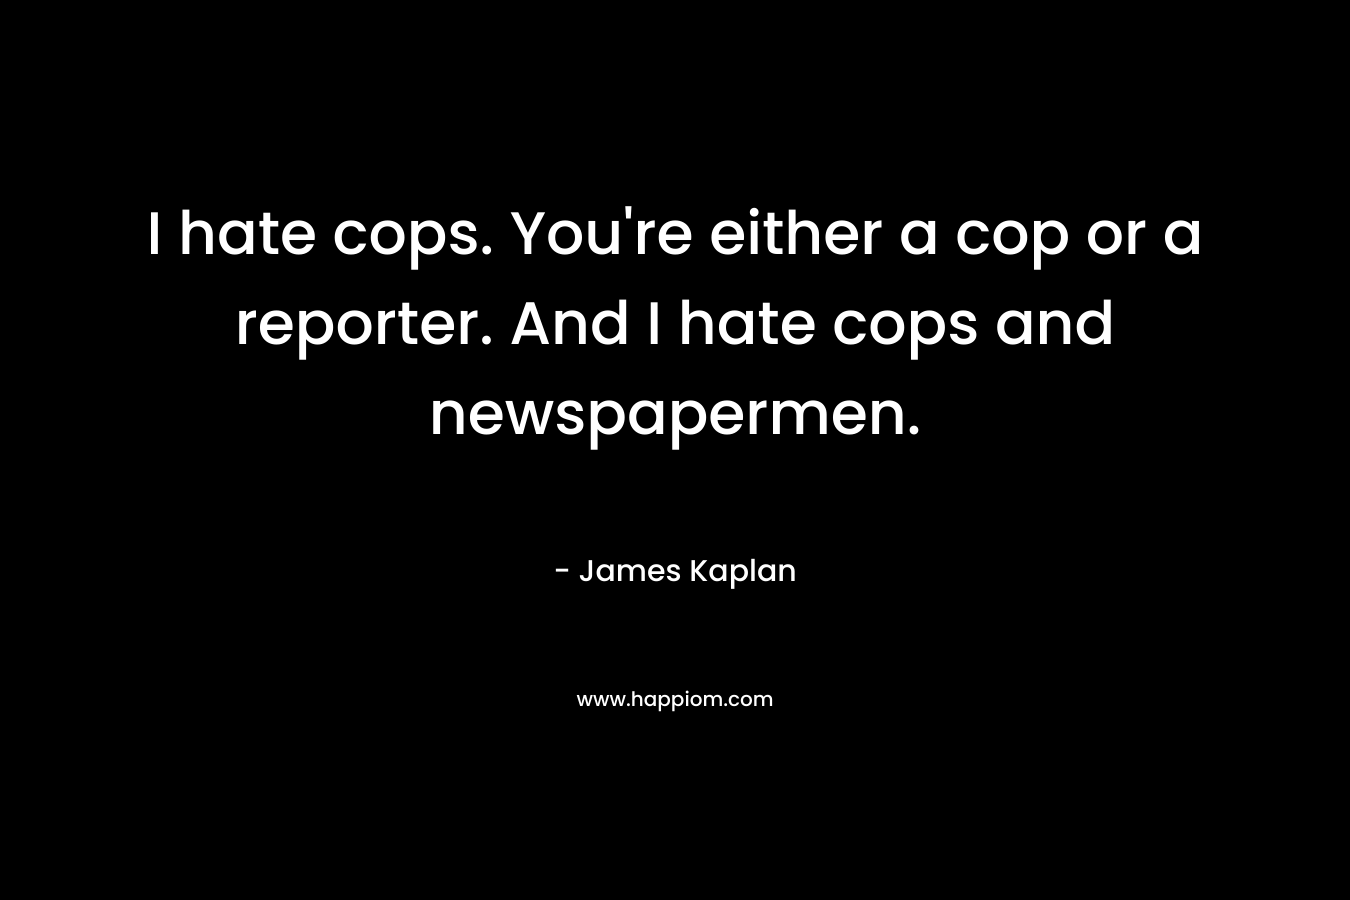 I hate cops. You're either a cop or a reporter. And I hate cops and newspapermen.